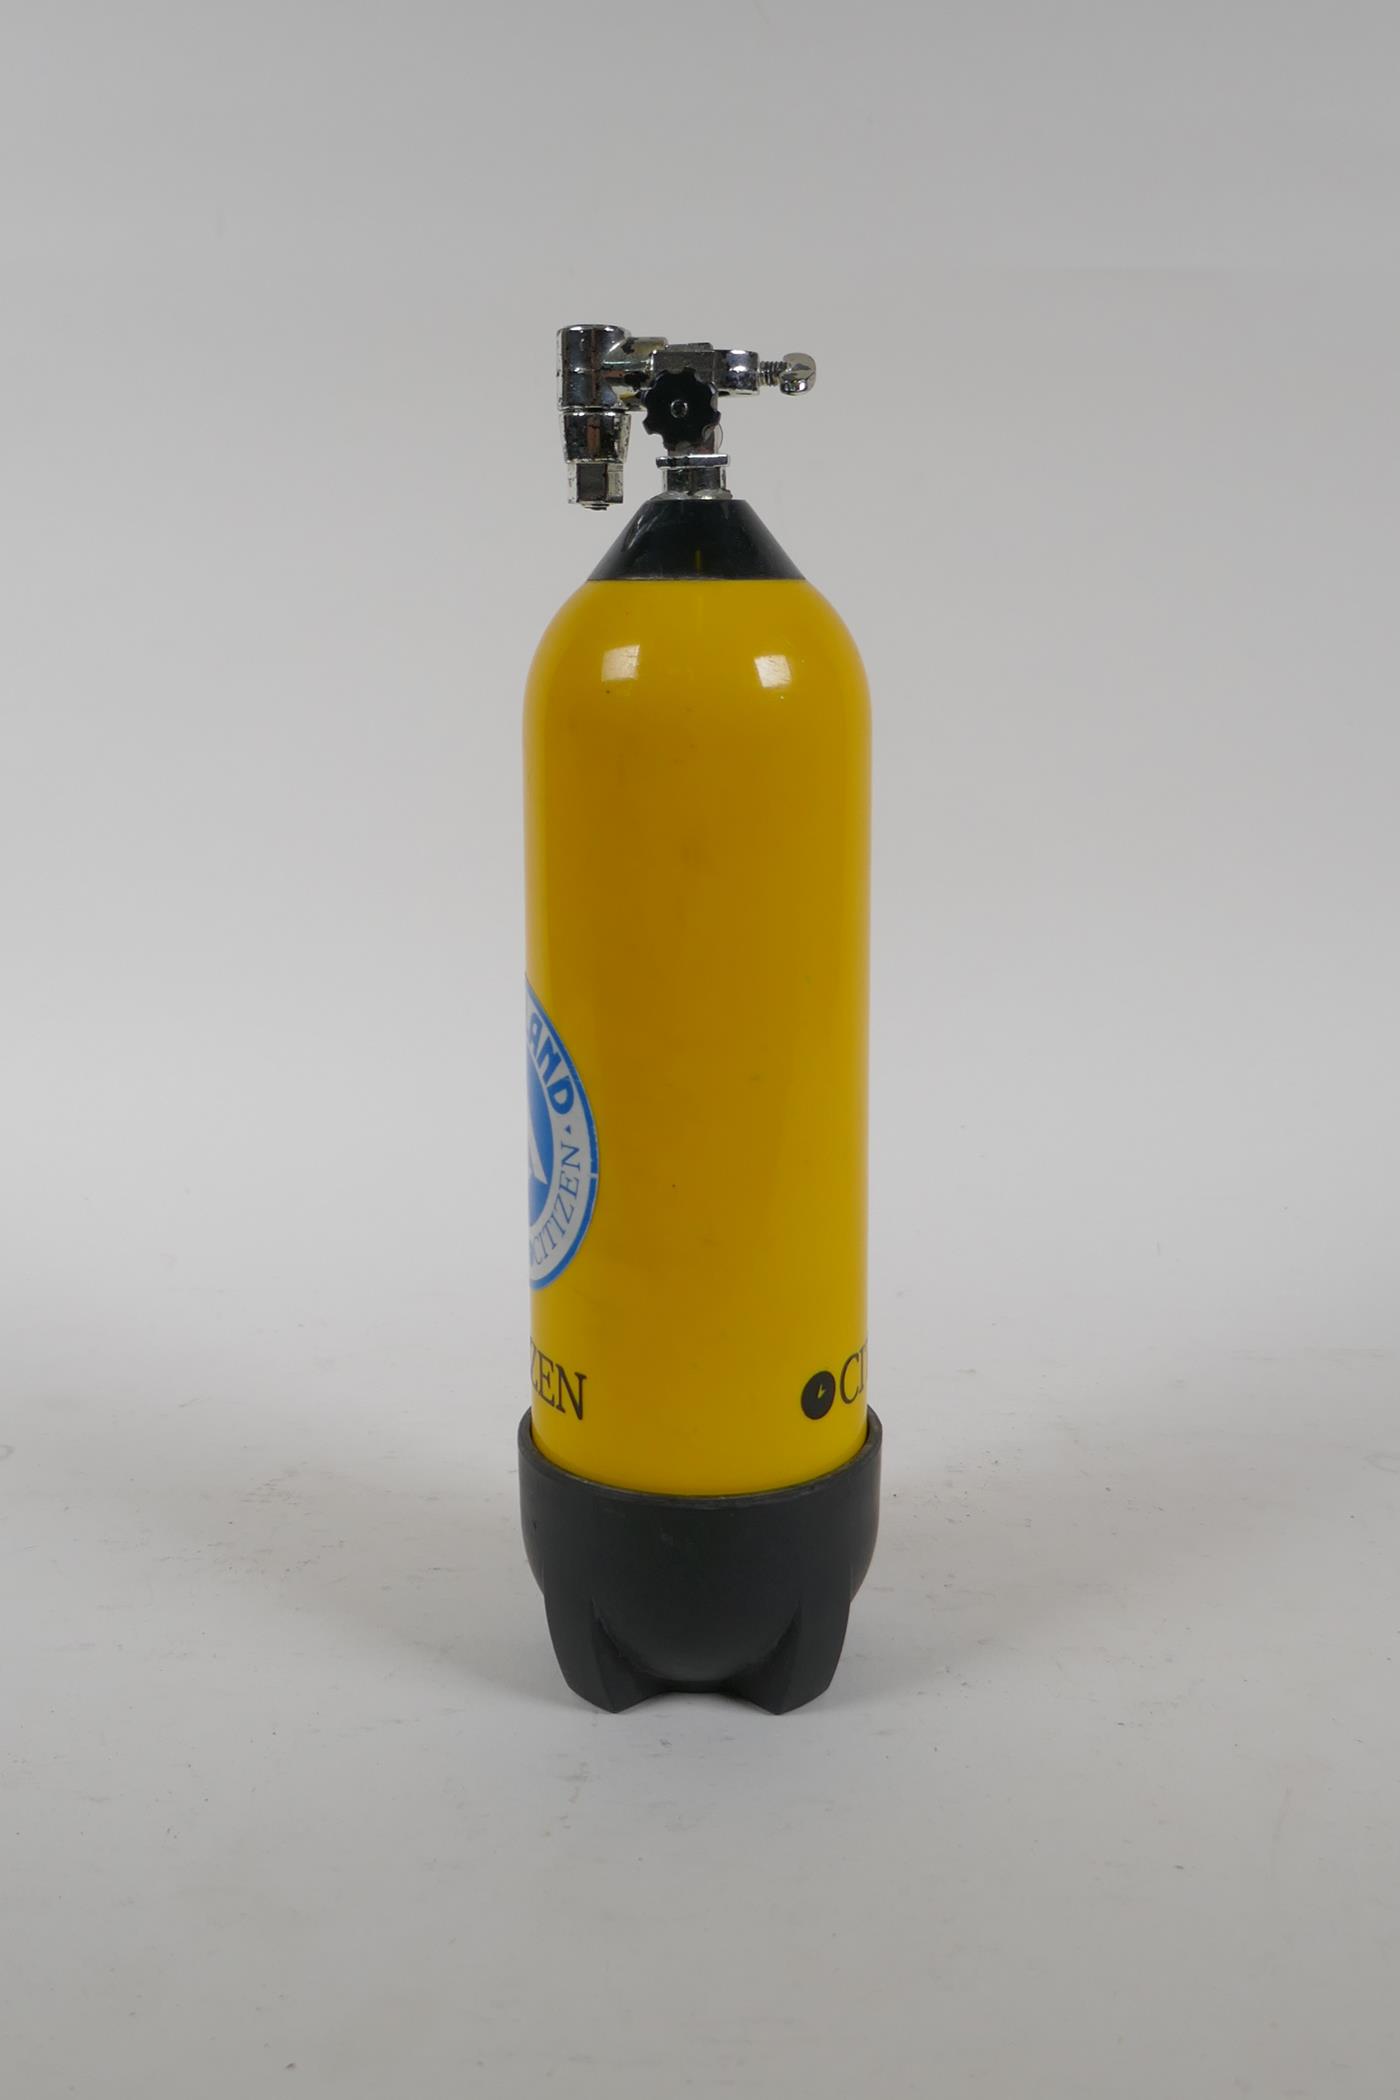 A Citizen Promaster Aqualand watch case in the form of a scuba air tank, 25cm high - Image 2 of 5